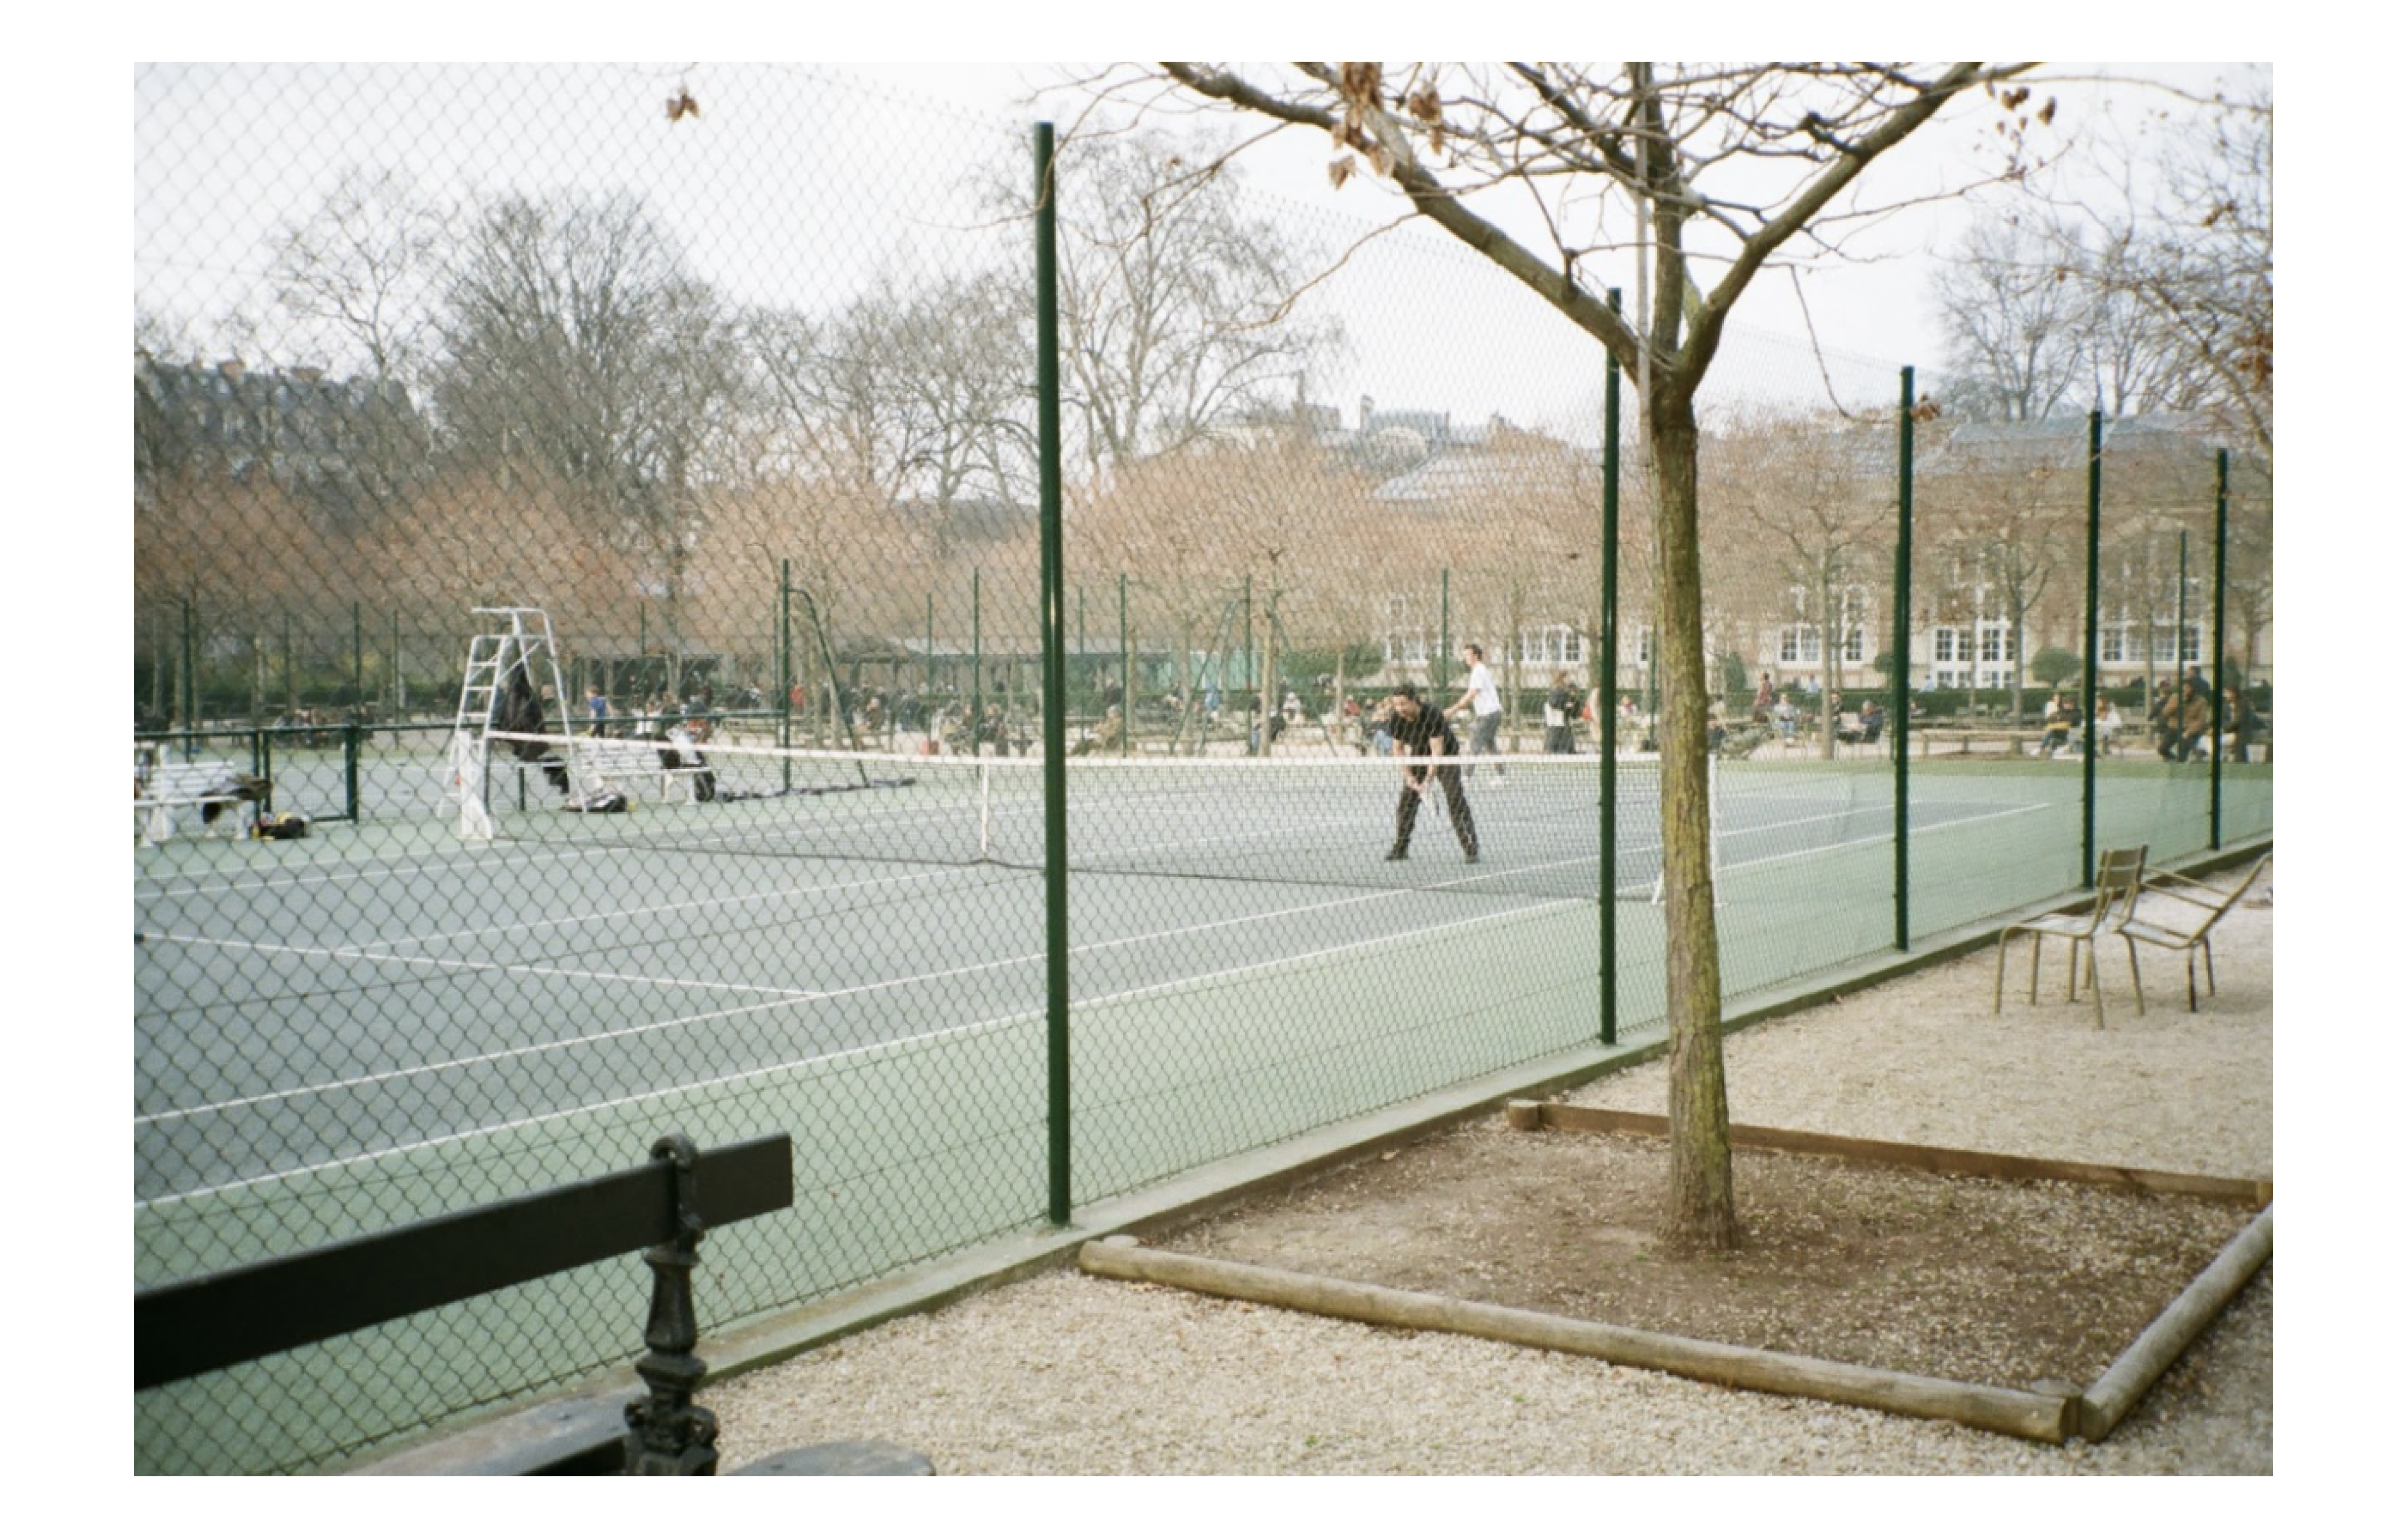 We love to catch an intense tennis game at Jardin du Luxembourg